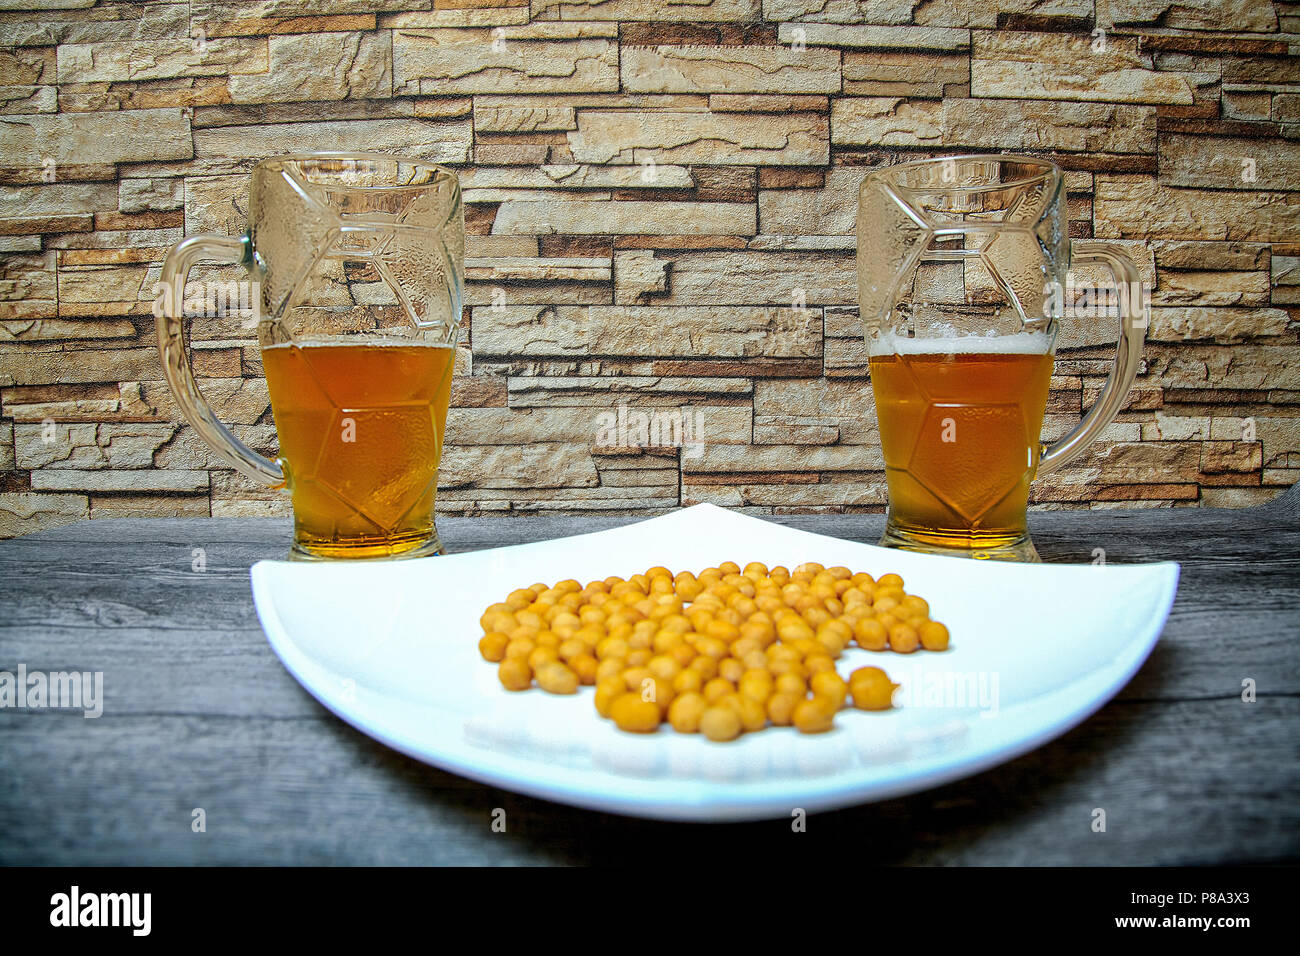 On the wooden table in the beer bar there are two large glasses of cold light beer and a plate with salted nuts. Stock Photo